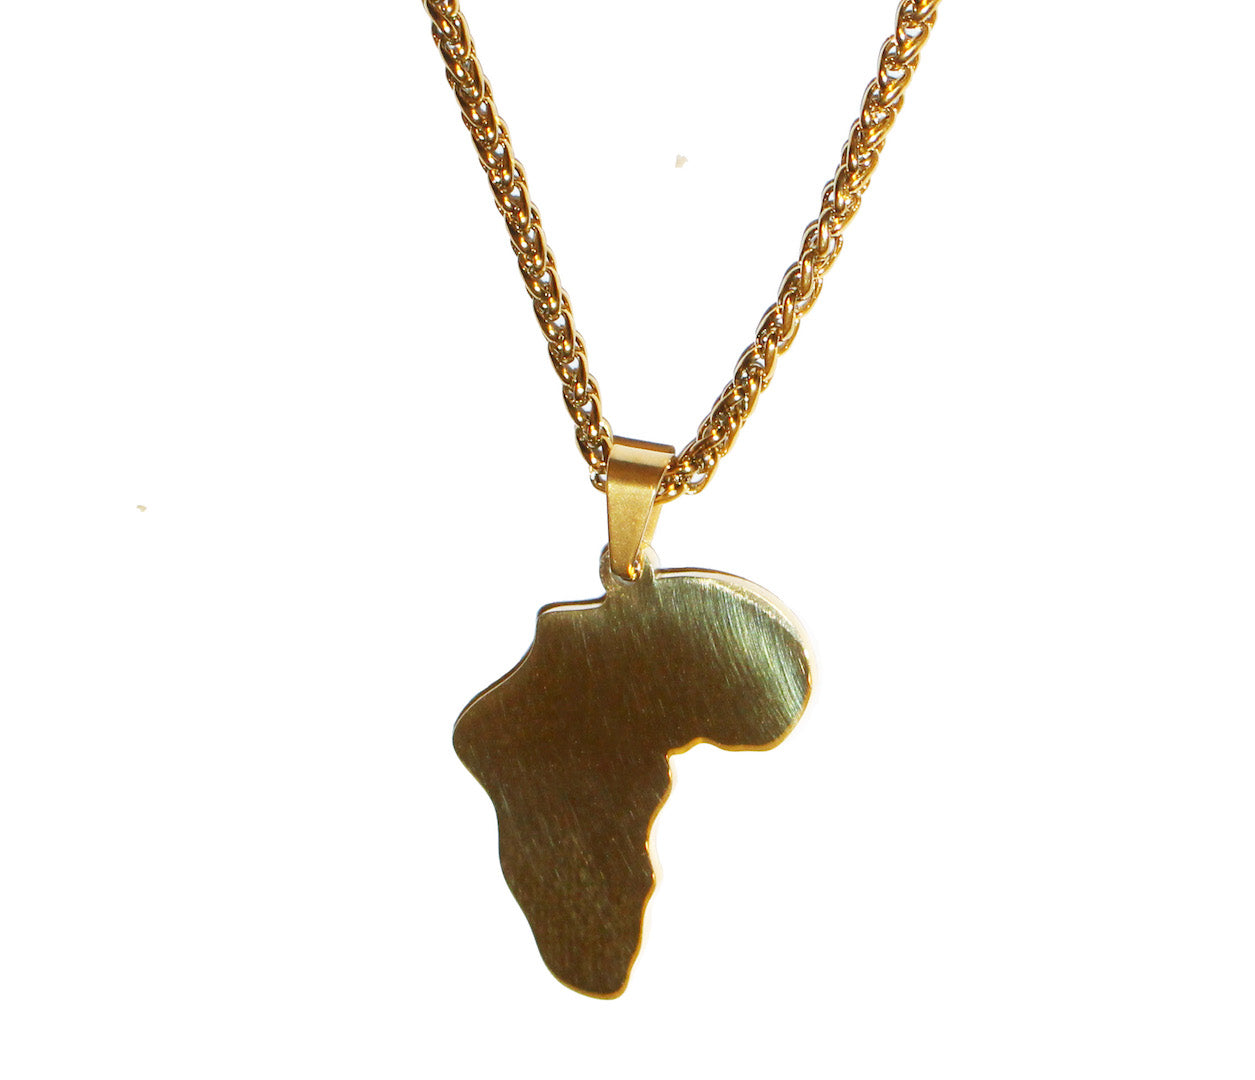 Wholesale Africa Necklace, African Necklace Gold, Gold Africa Necklace, Africa  Map Necklace, Africa Pendant, African Jewelry, 10 Pieces - Etsy